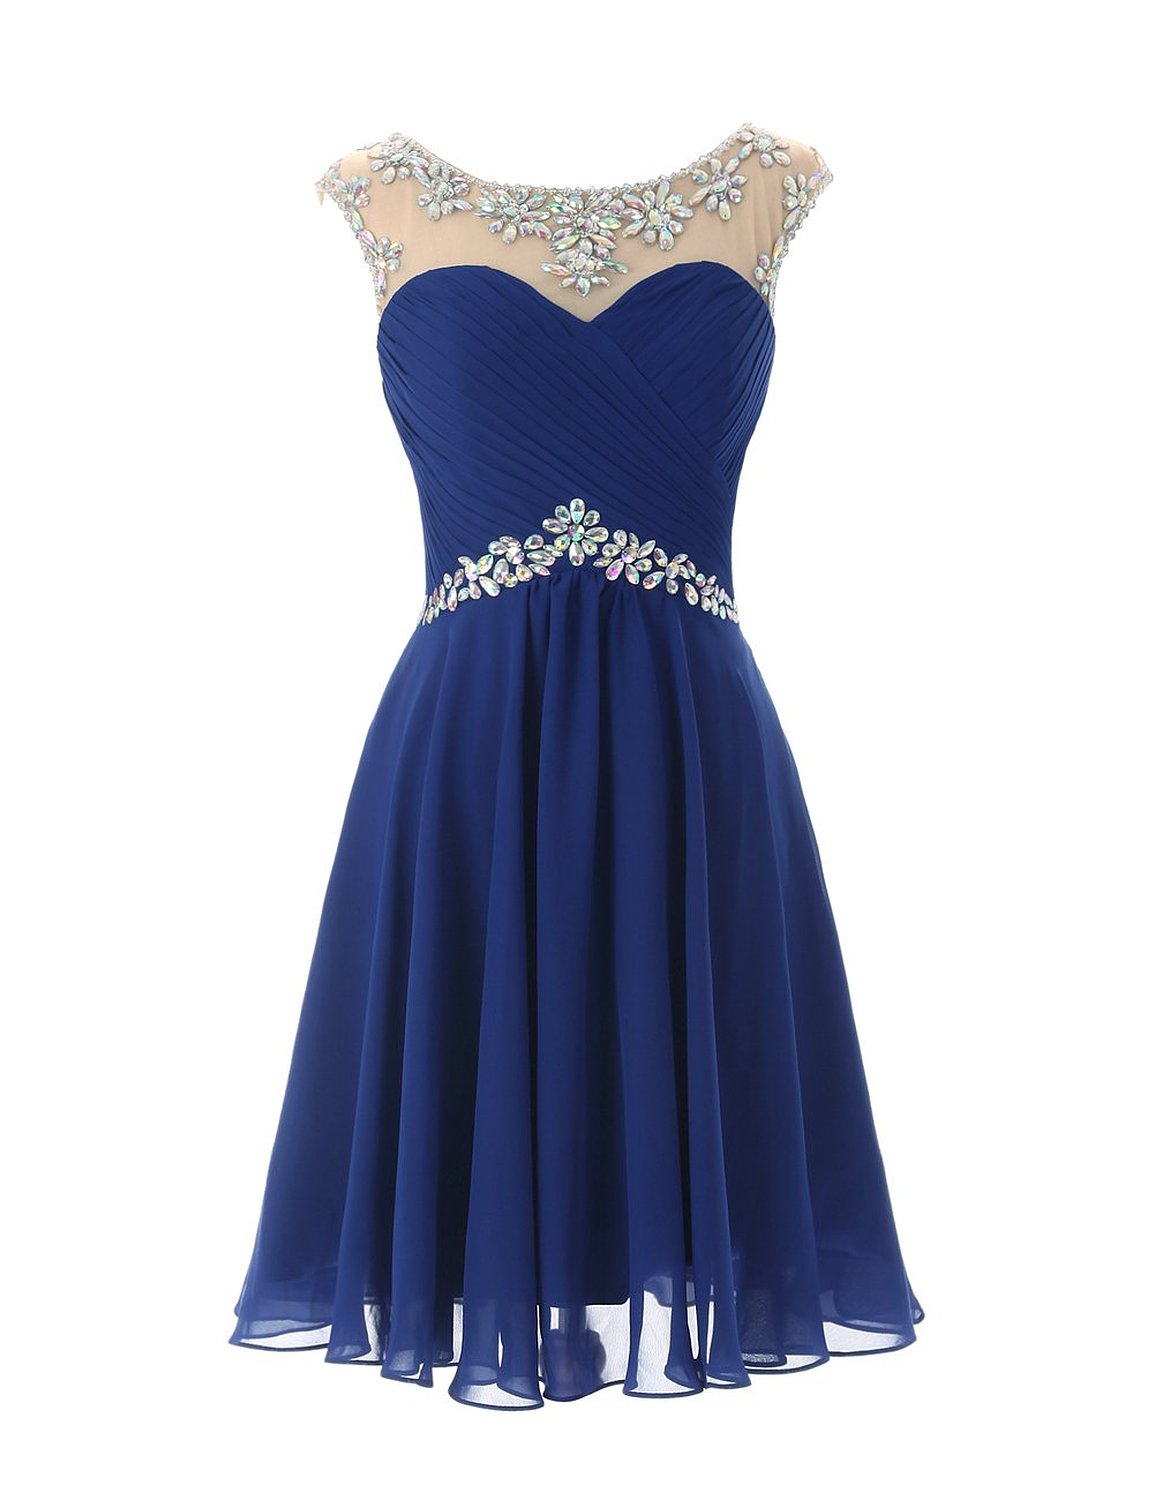 Short Prom Dresses, Sexy Homecoming Dress, Homecoming Dress For Juniors ...